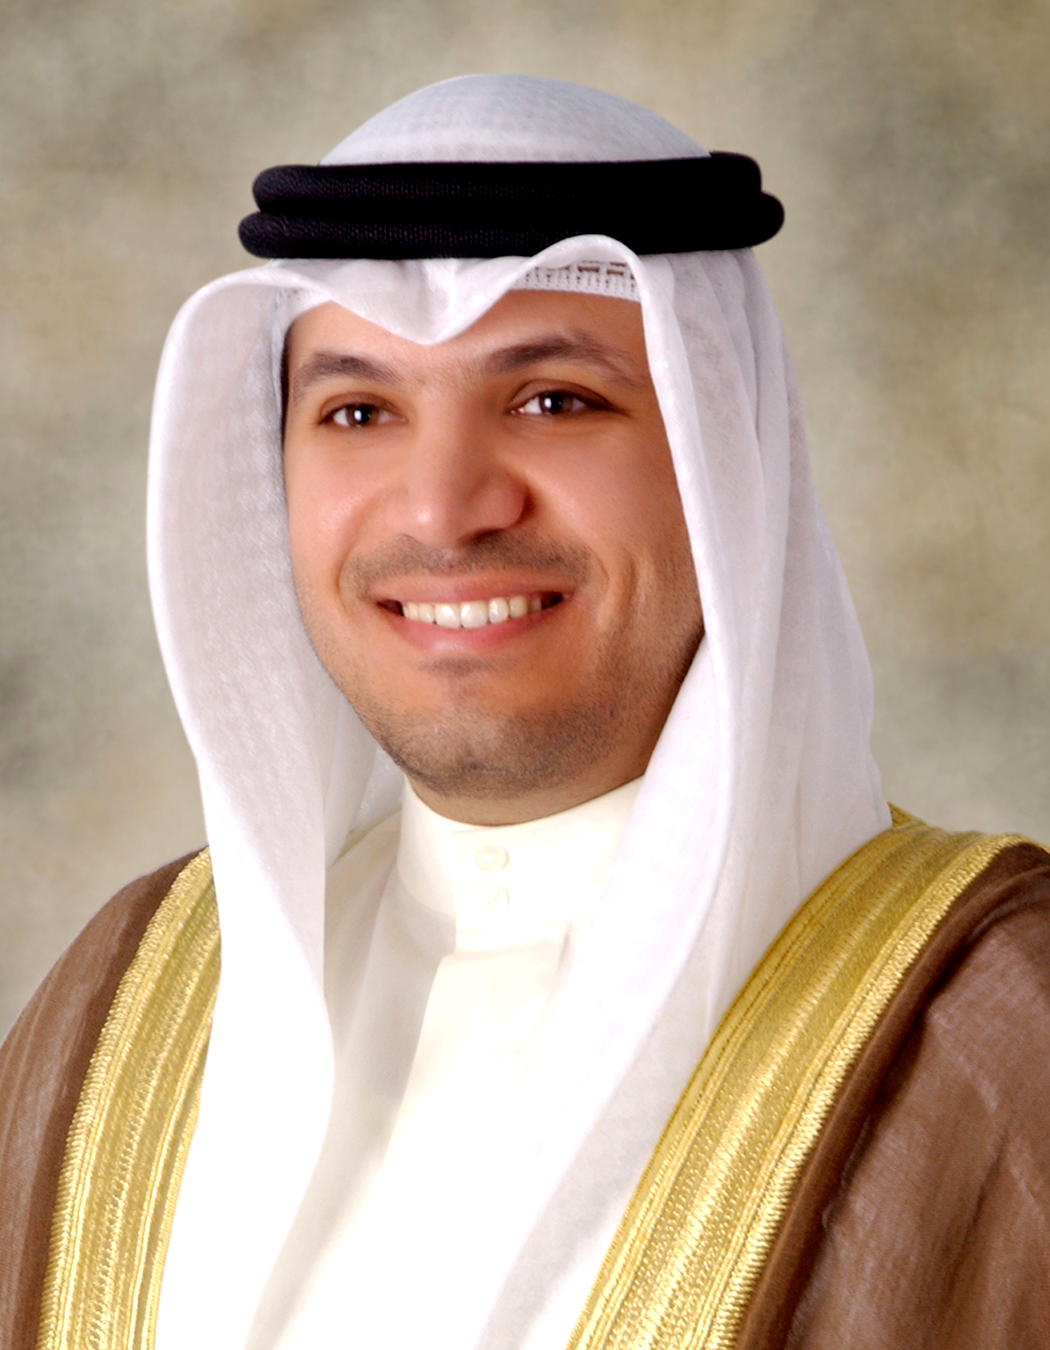 Central Bank of Kuwait Governor Mohammad Al-Hashel